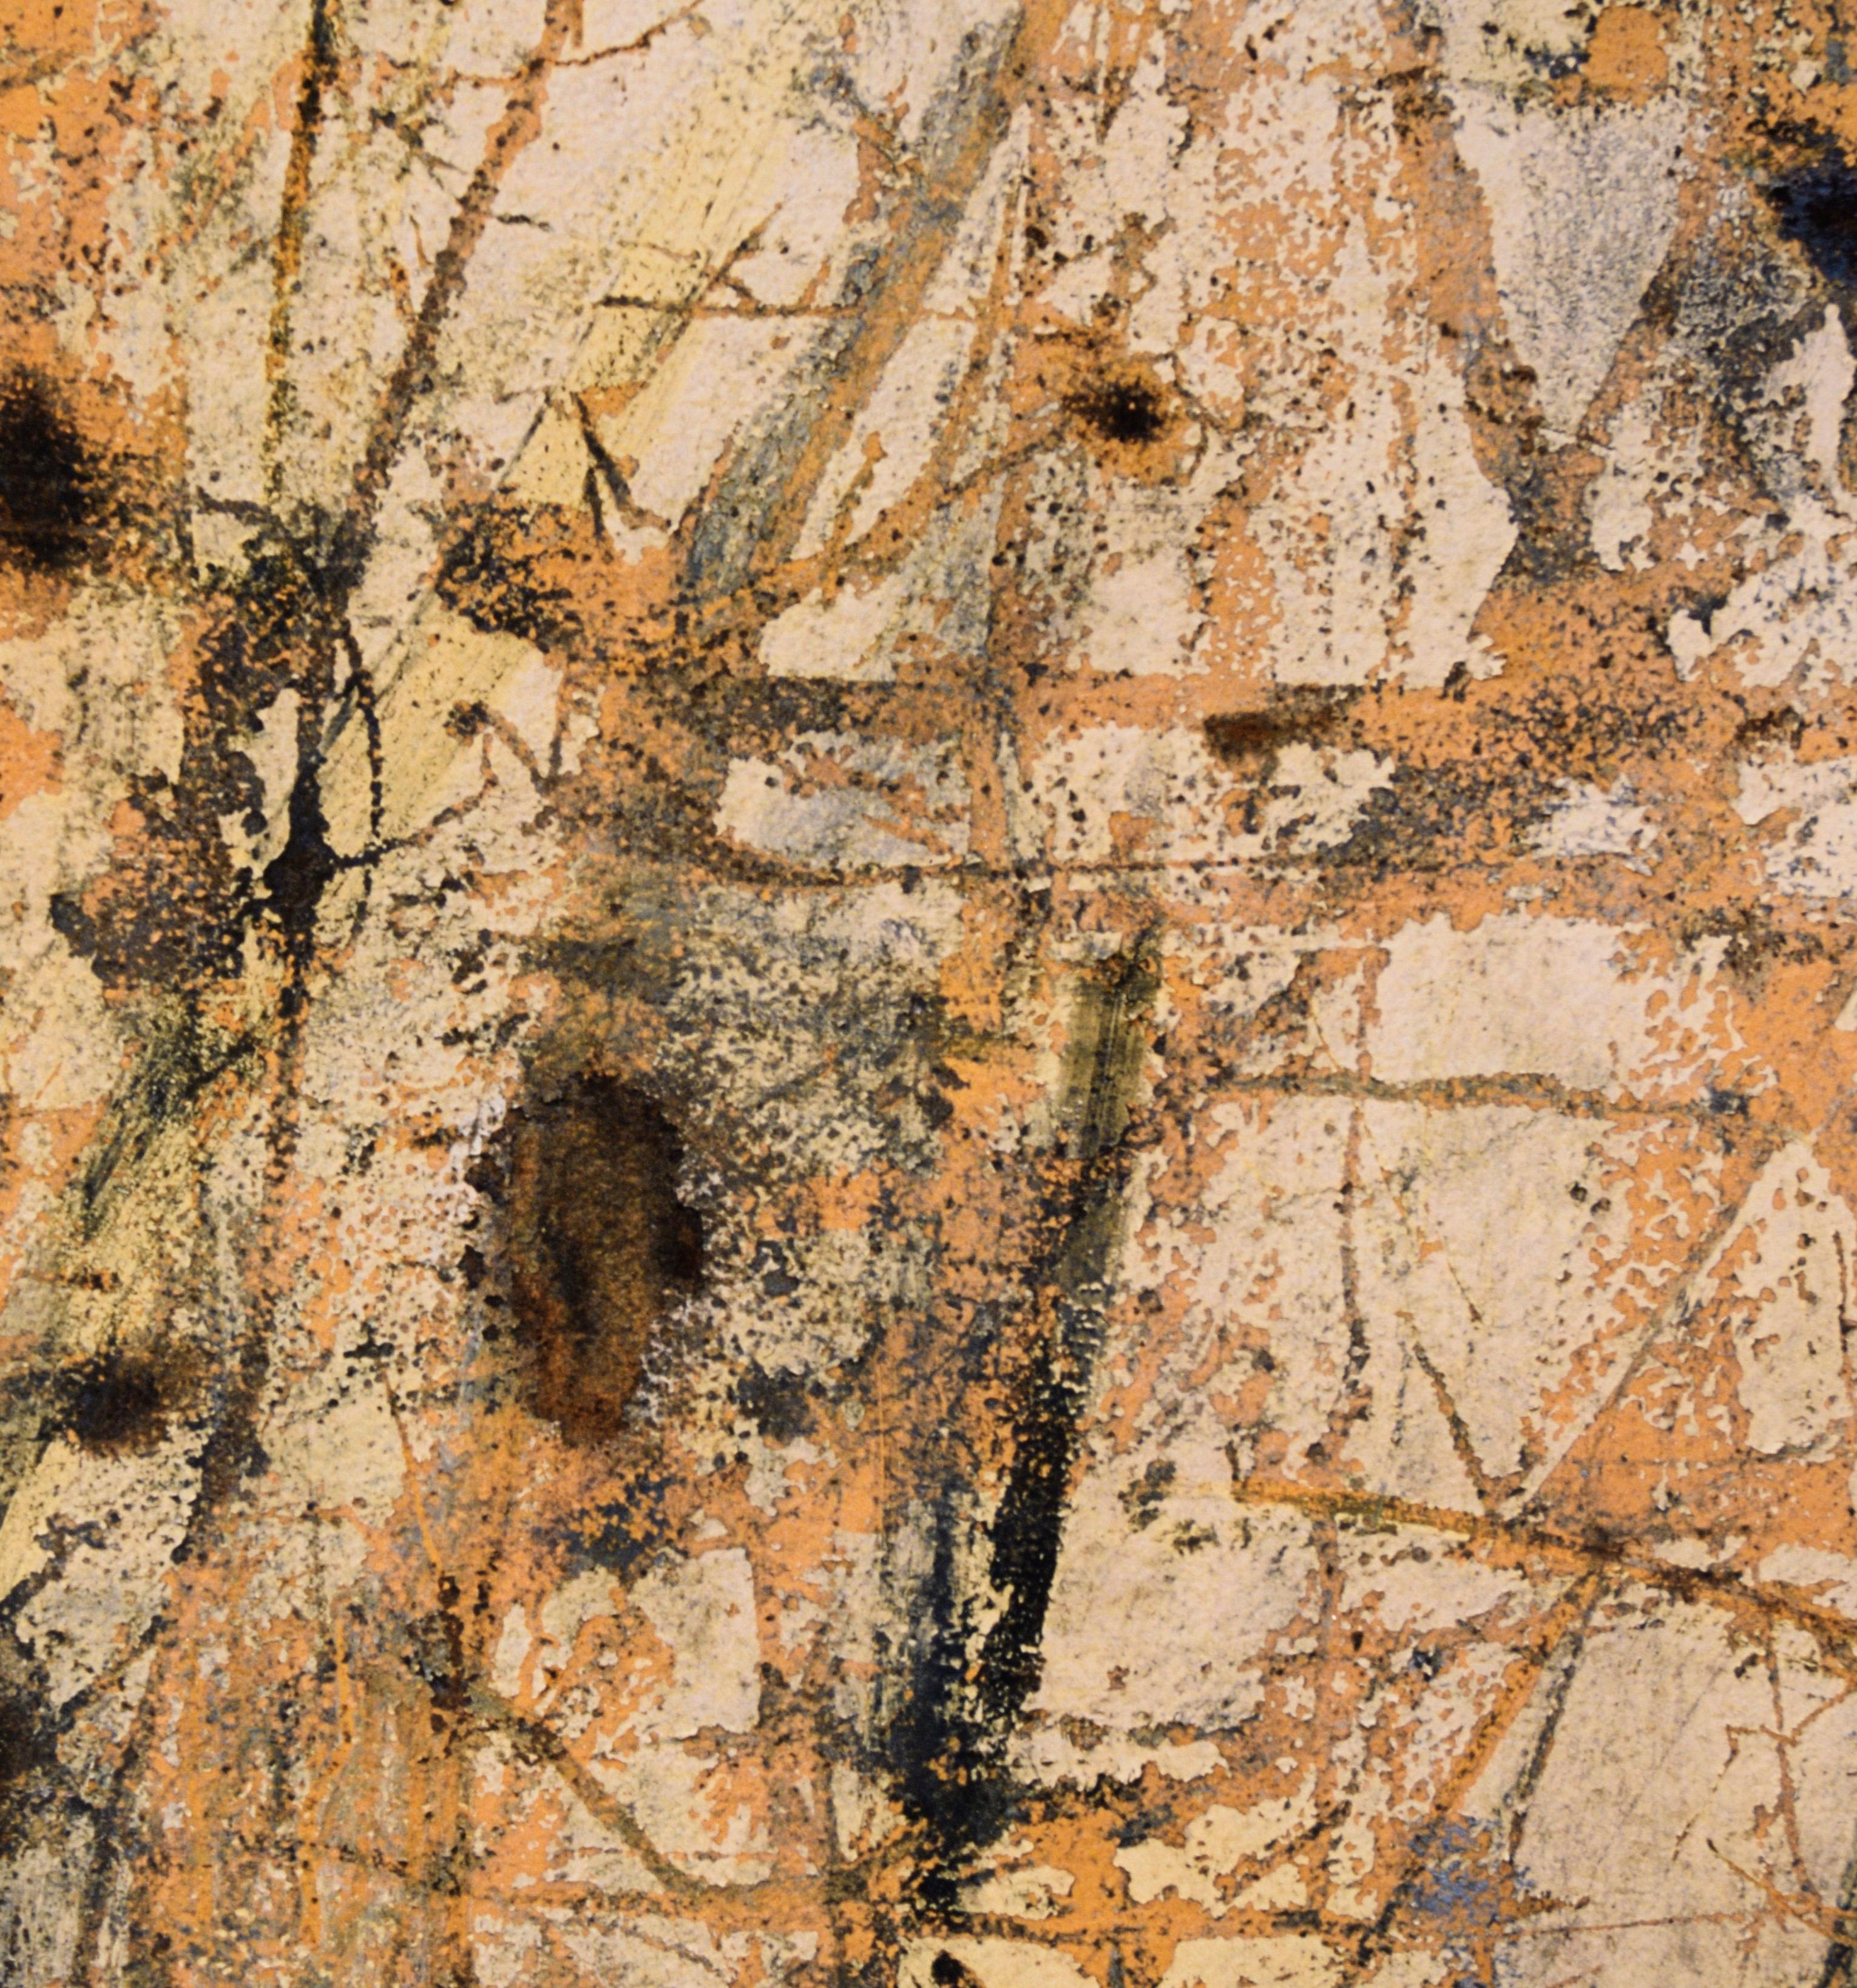 White Paint Splatters - Large Scale Textural Photograph

Detailed macro photo by Bill Clark (American, 20th Century). Clark has taken a photograph of heavily painted concrete that has been scratched, creating a variety of patterns and textures. The